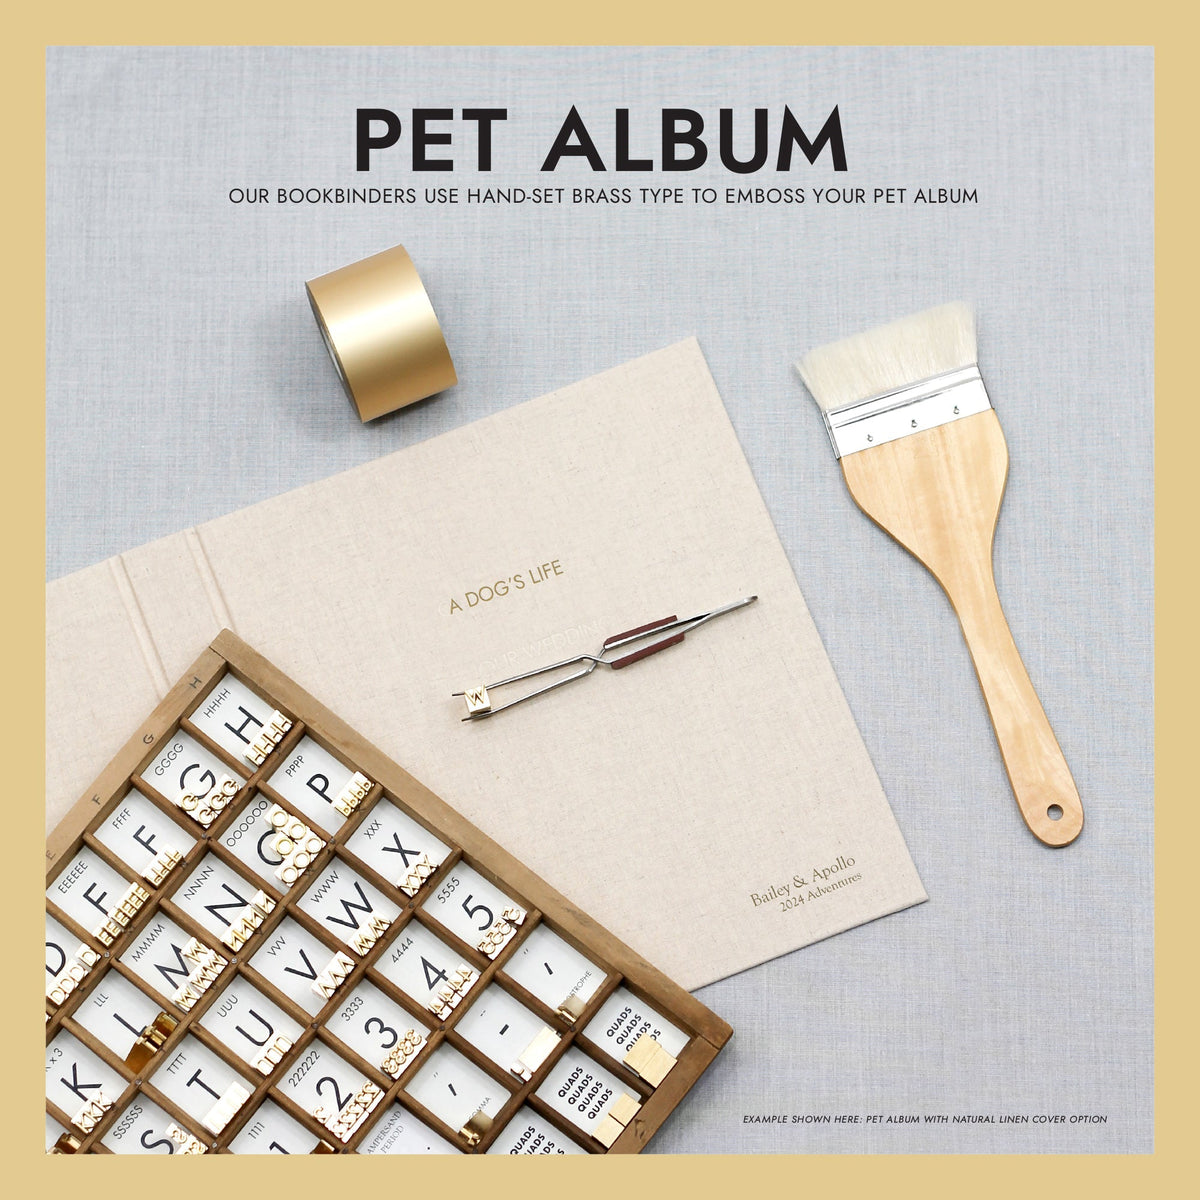 Pet Album with Slate Vegan Leather Cover